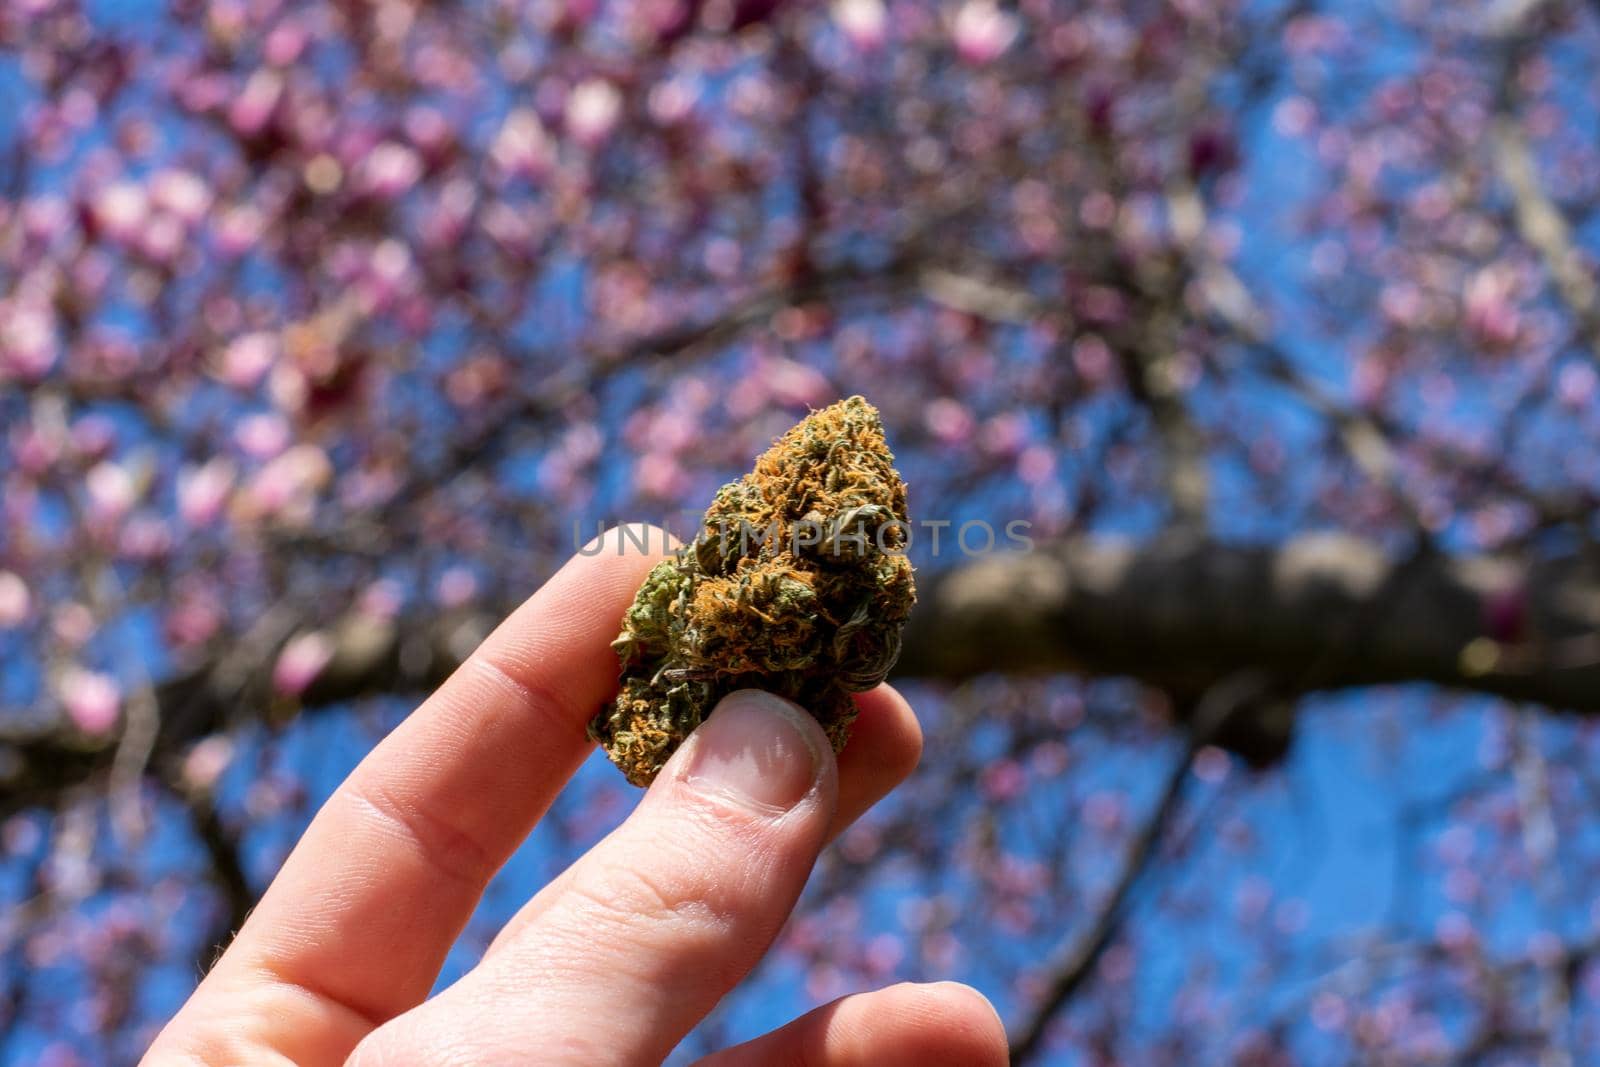 A Hand Holding Up a Cannabis Nug With a Cherry Blossom Tree Behind by bju12290